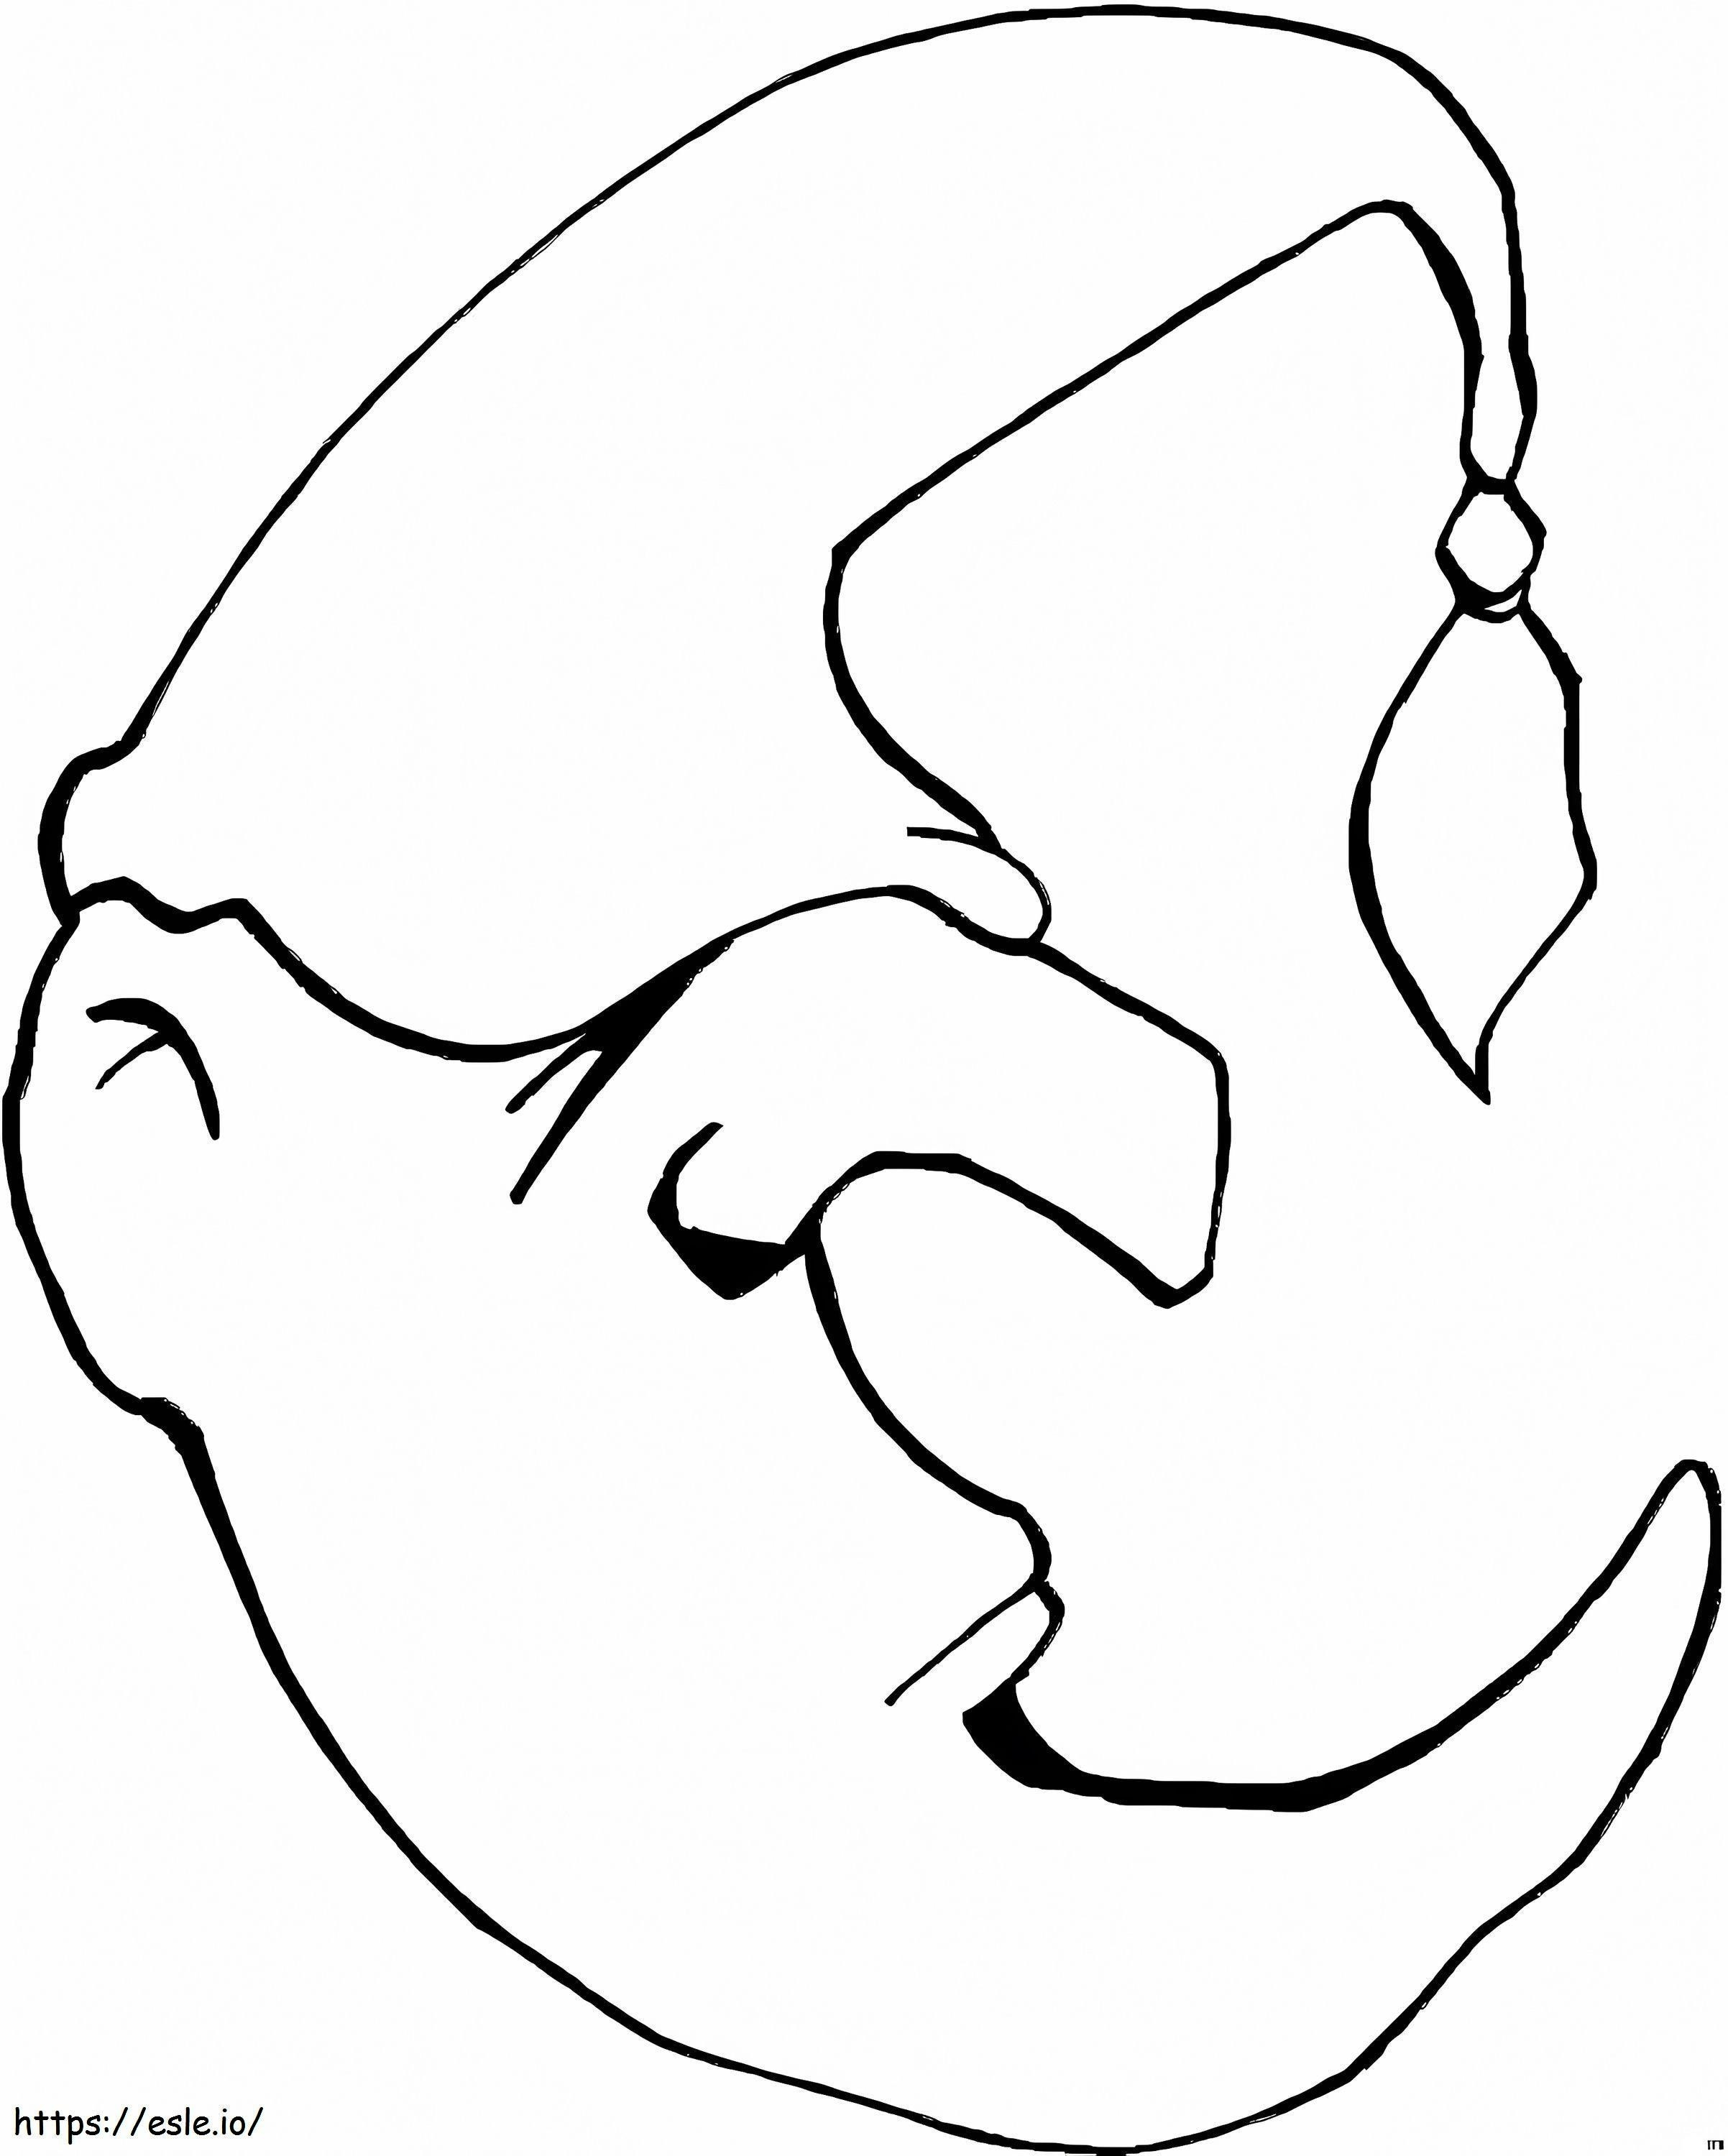 Moon In Nightcap coloring page